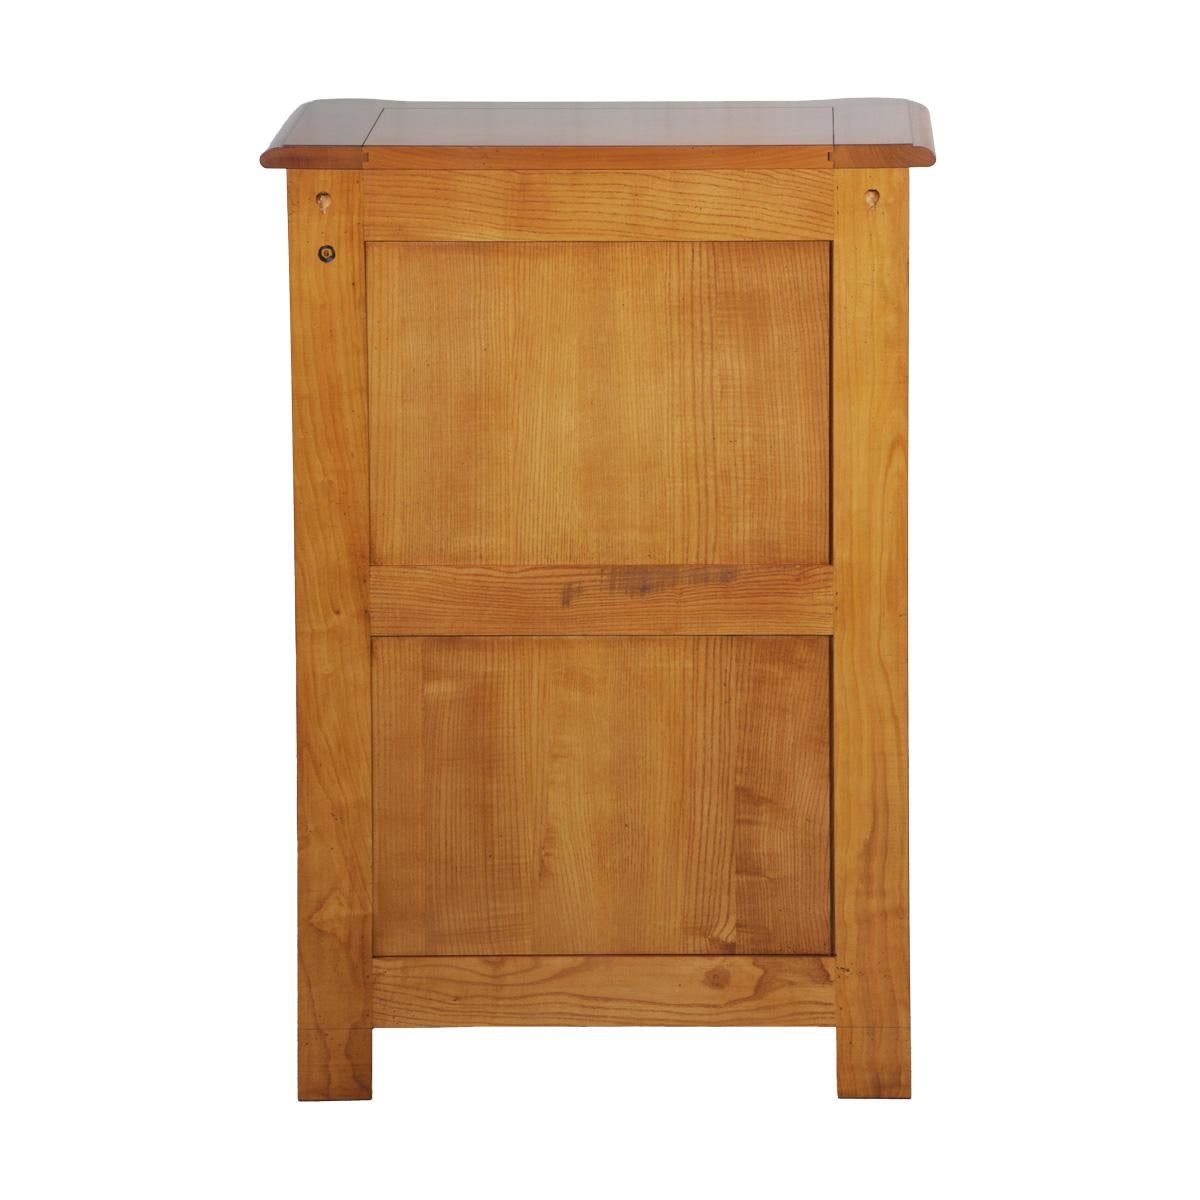 4-lacquered drawer French Chiffonier in solid cherry wood For Sale 5